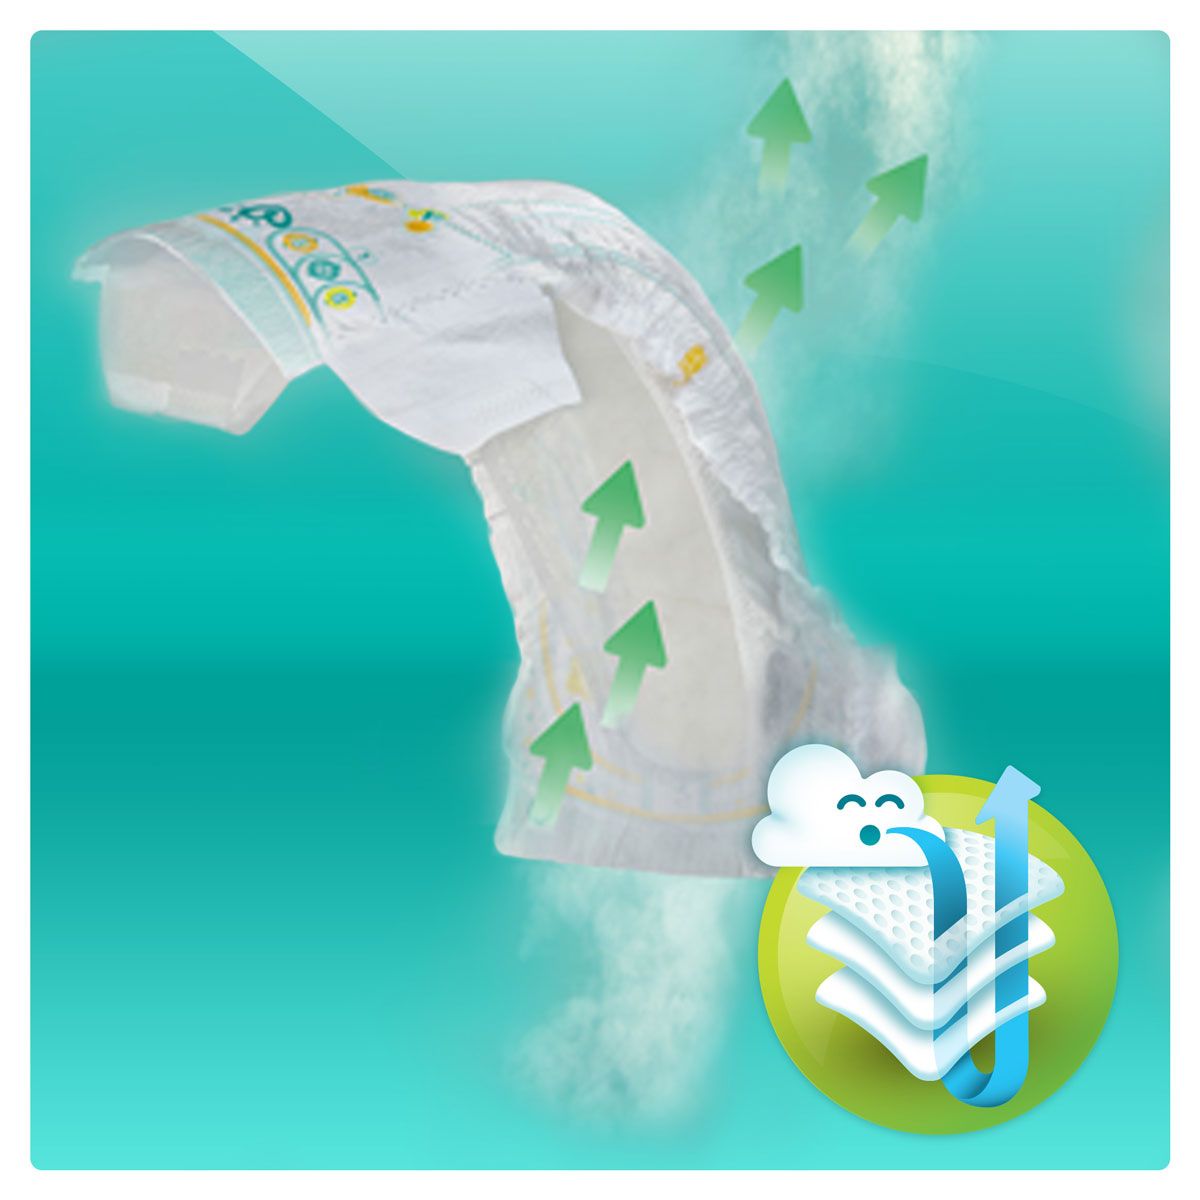 Pampers  Active Baby 9-16  ( 4+) 18 